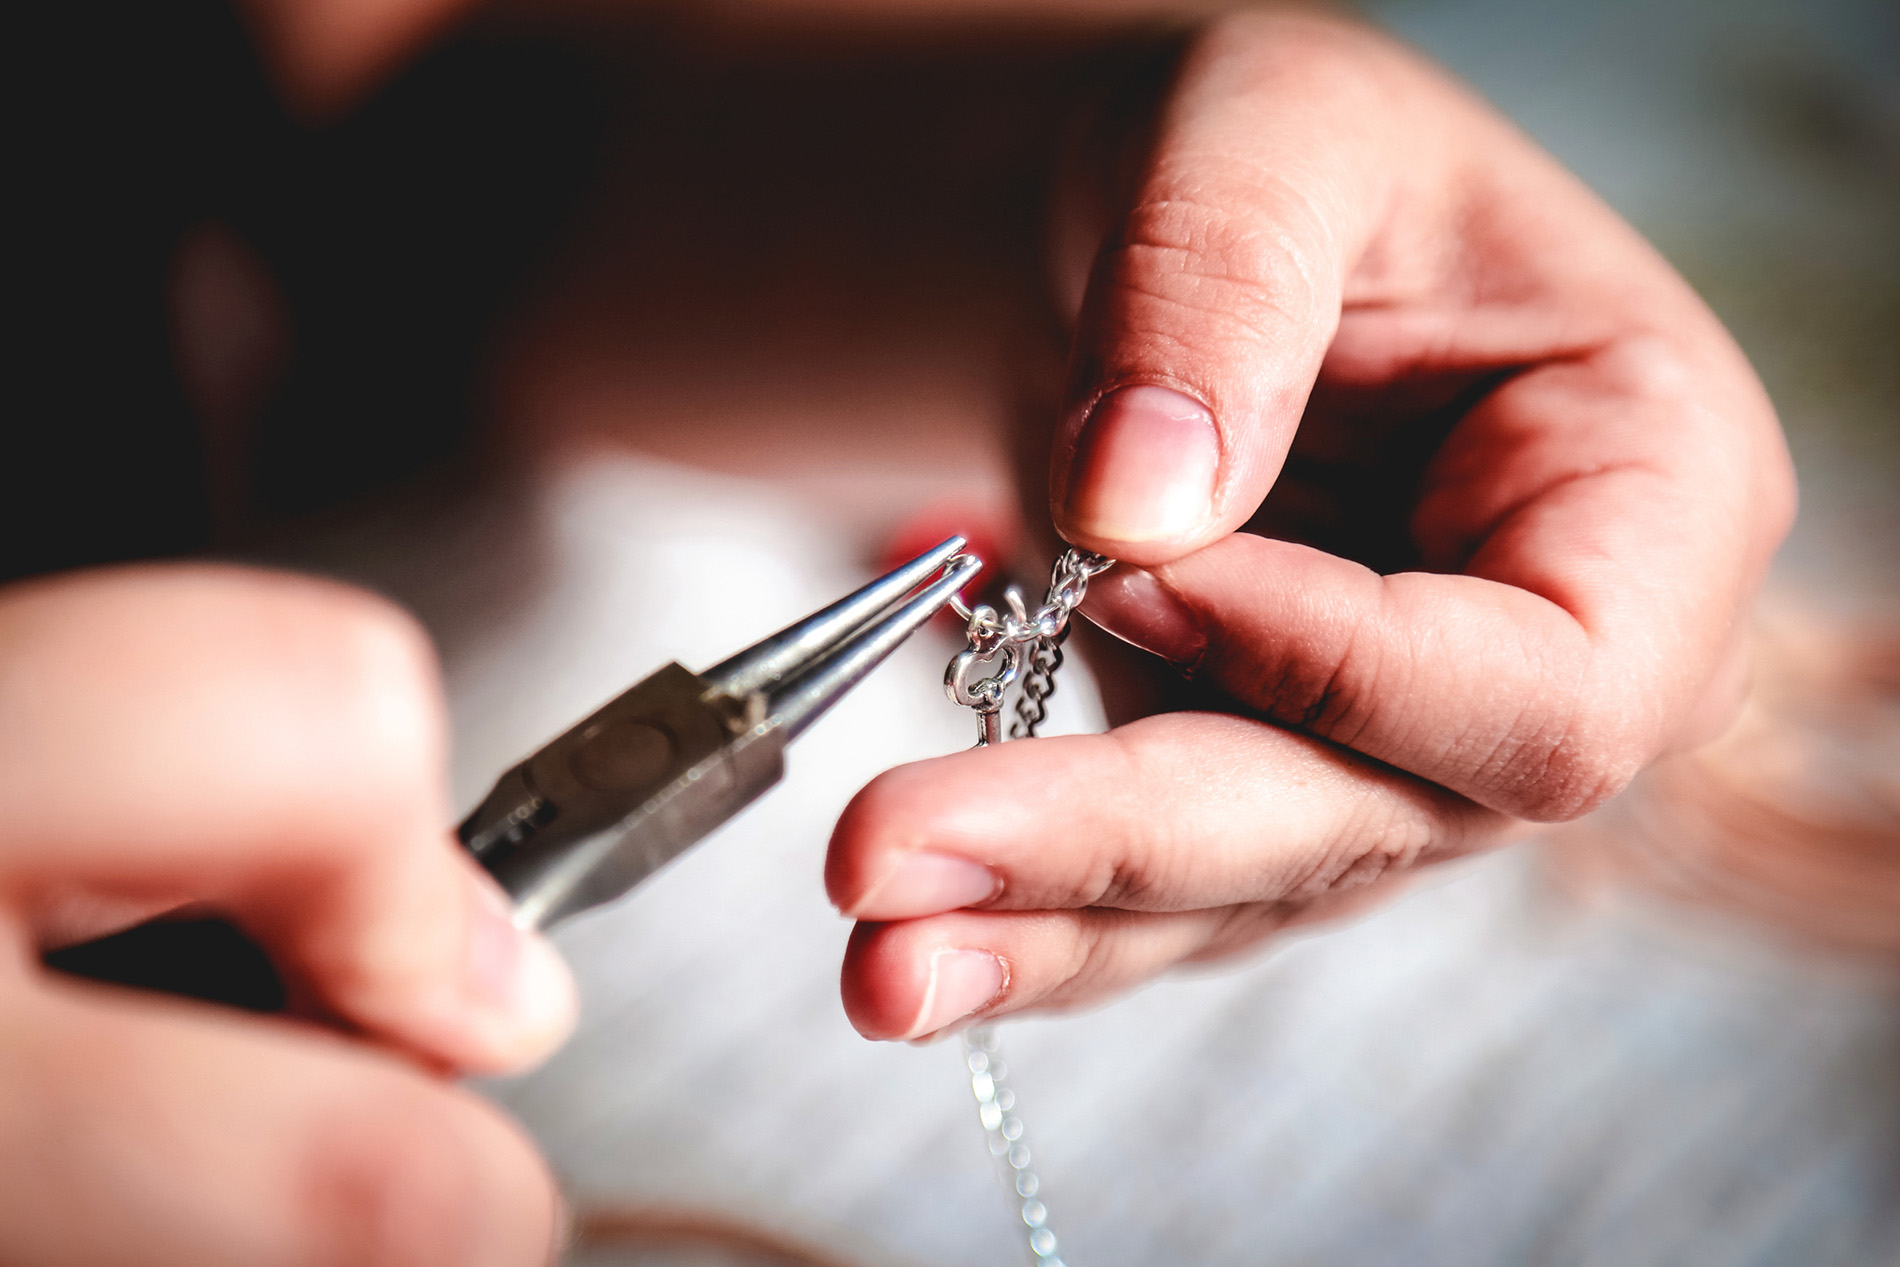 Jewelry being crafted with needle-nose pliers.